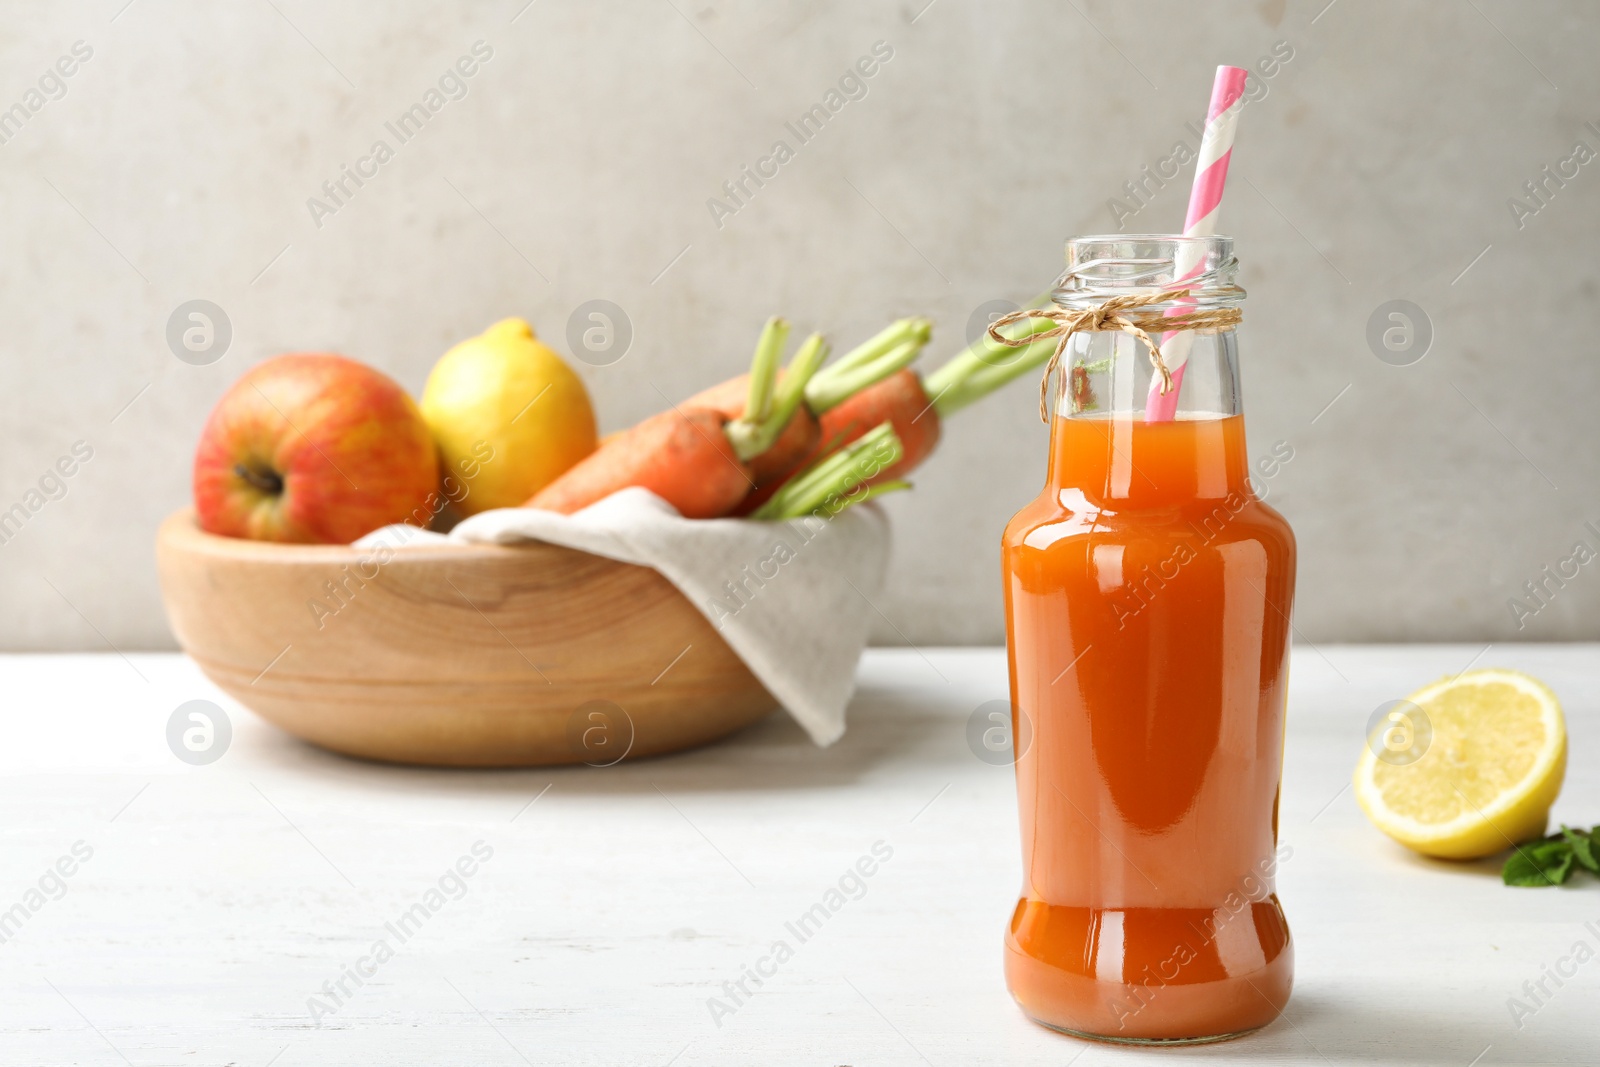 Photo of Bottle of fresh carrot juice and ingredients on white wooden table against light background, space for text